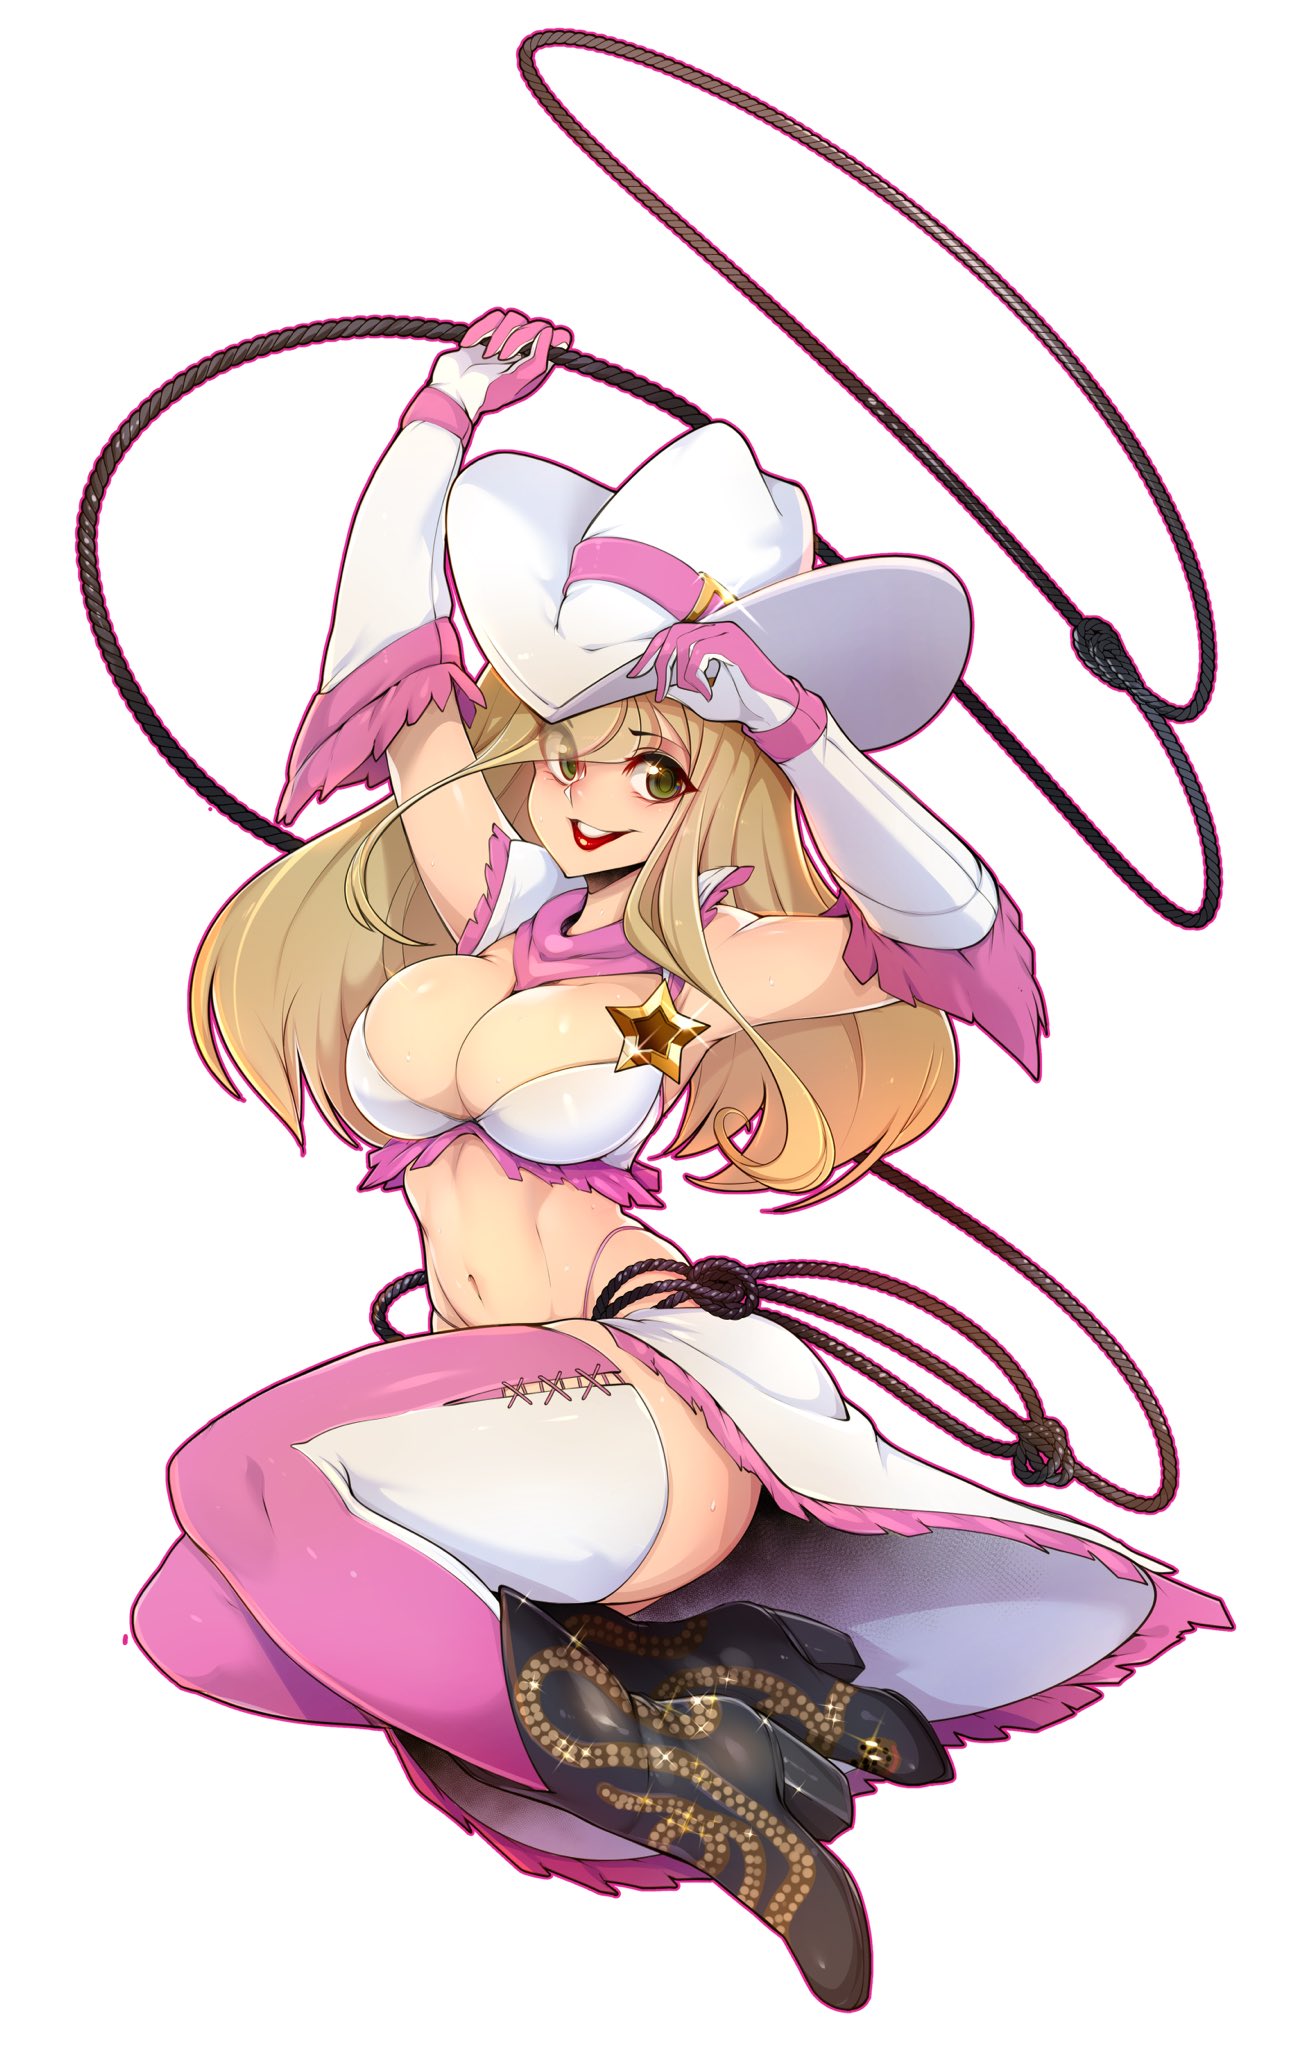 :d ankle_boots bandana bikini black_footwear blonde_hair boots breasts commentary commission cowboy_hat elbow_gloves english_commentary full_body glint gloves green_eyes hand_on_headwear hand_up hat high_heel_boots high_heels highres holding_lasso large_breasts lasso lipstick long_hair looking_at_viewer makeup multicolored multicolored_clothes multicolored_gloves multicolored_legwear navel open_mouth original pink_gloves pink_legwear red_lips red_lipstick sheriff_badge simple_background slugbox smile swimsuit thigh-highs waist_cape white_background white_gloves white_headwear white_legwear